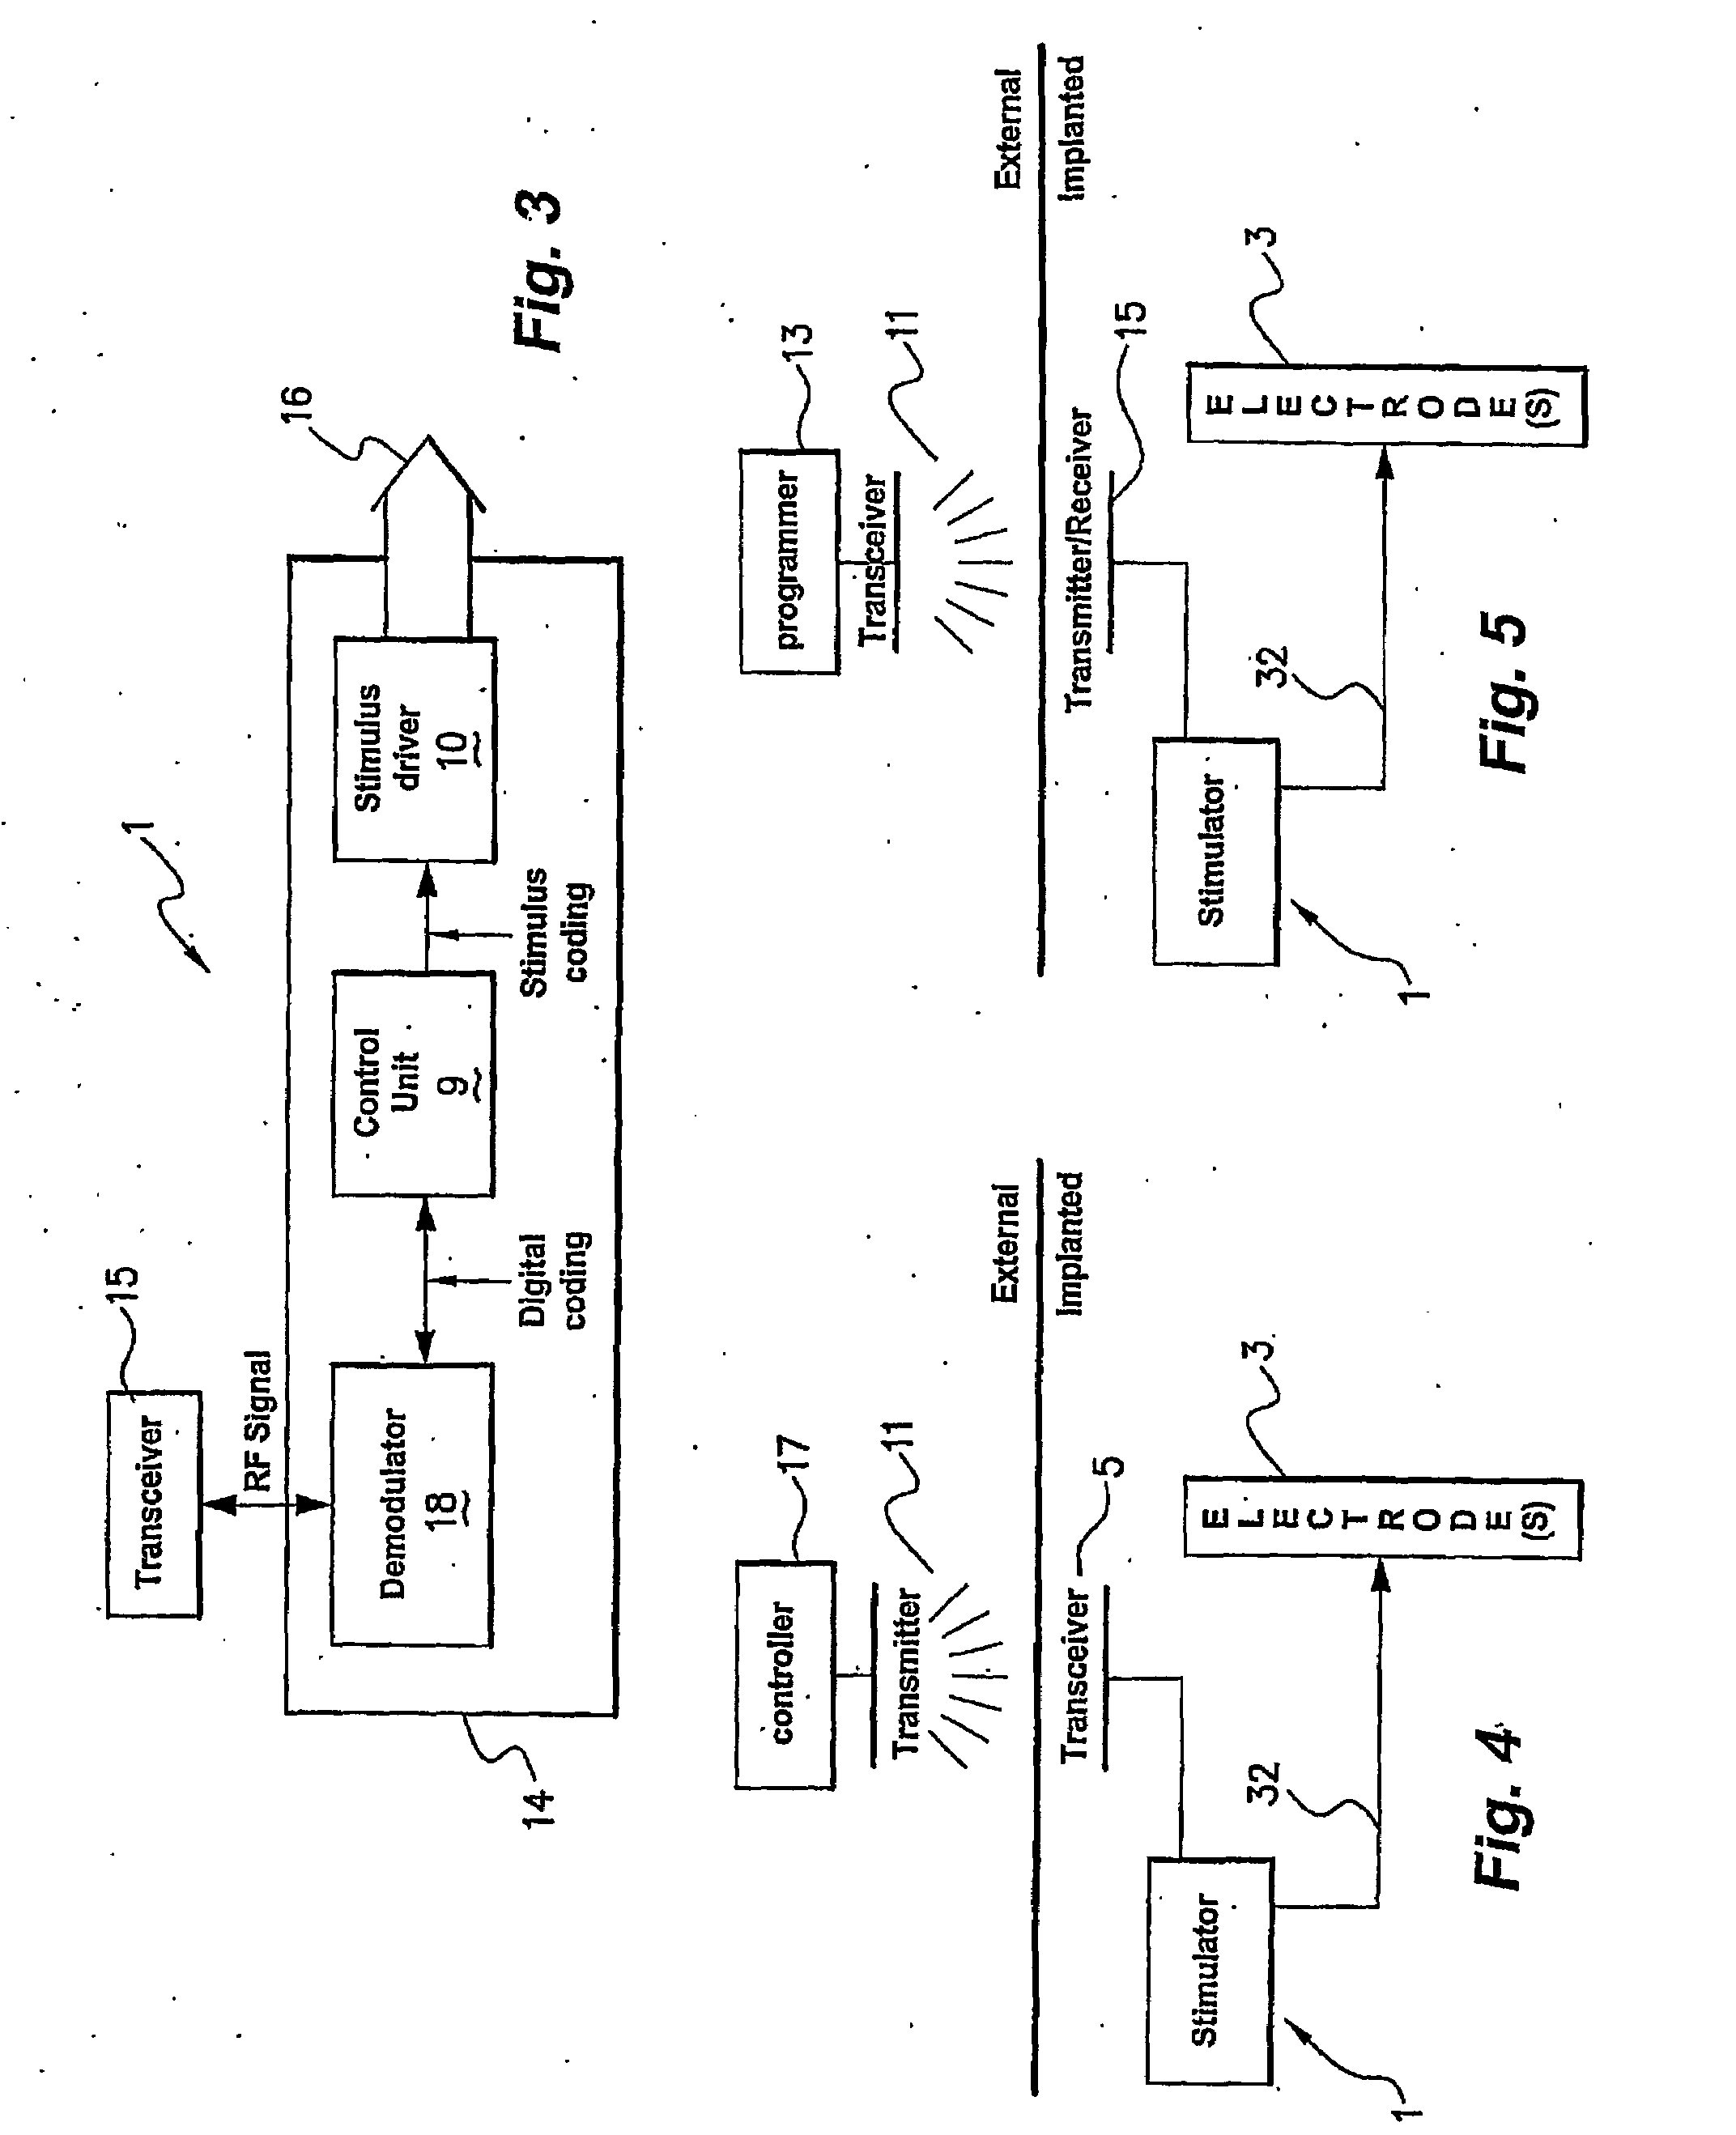 Method and Apparatus for Treating Fecal Incontinence